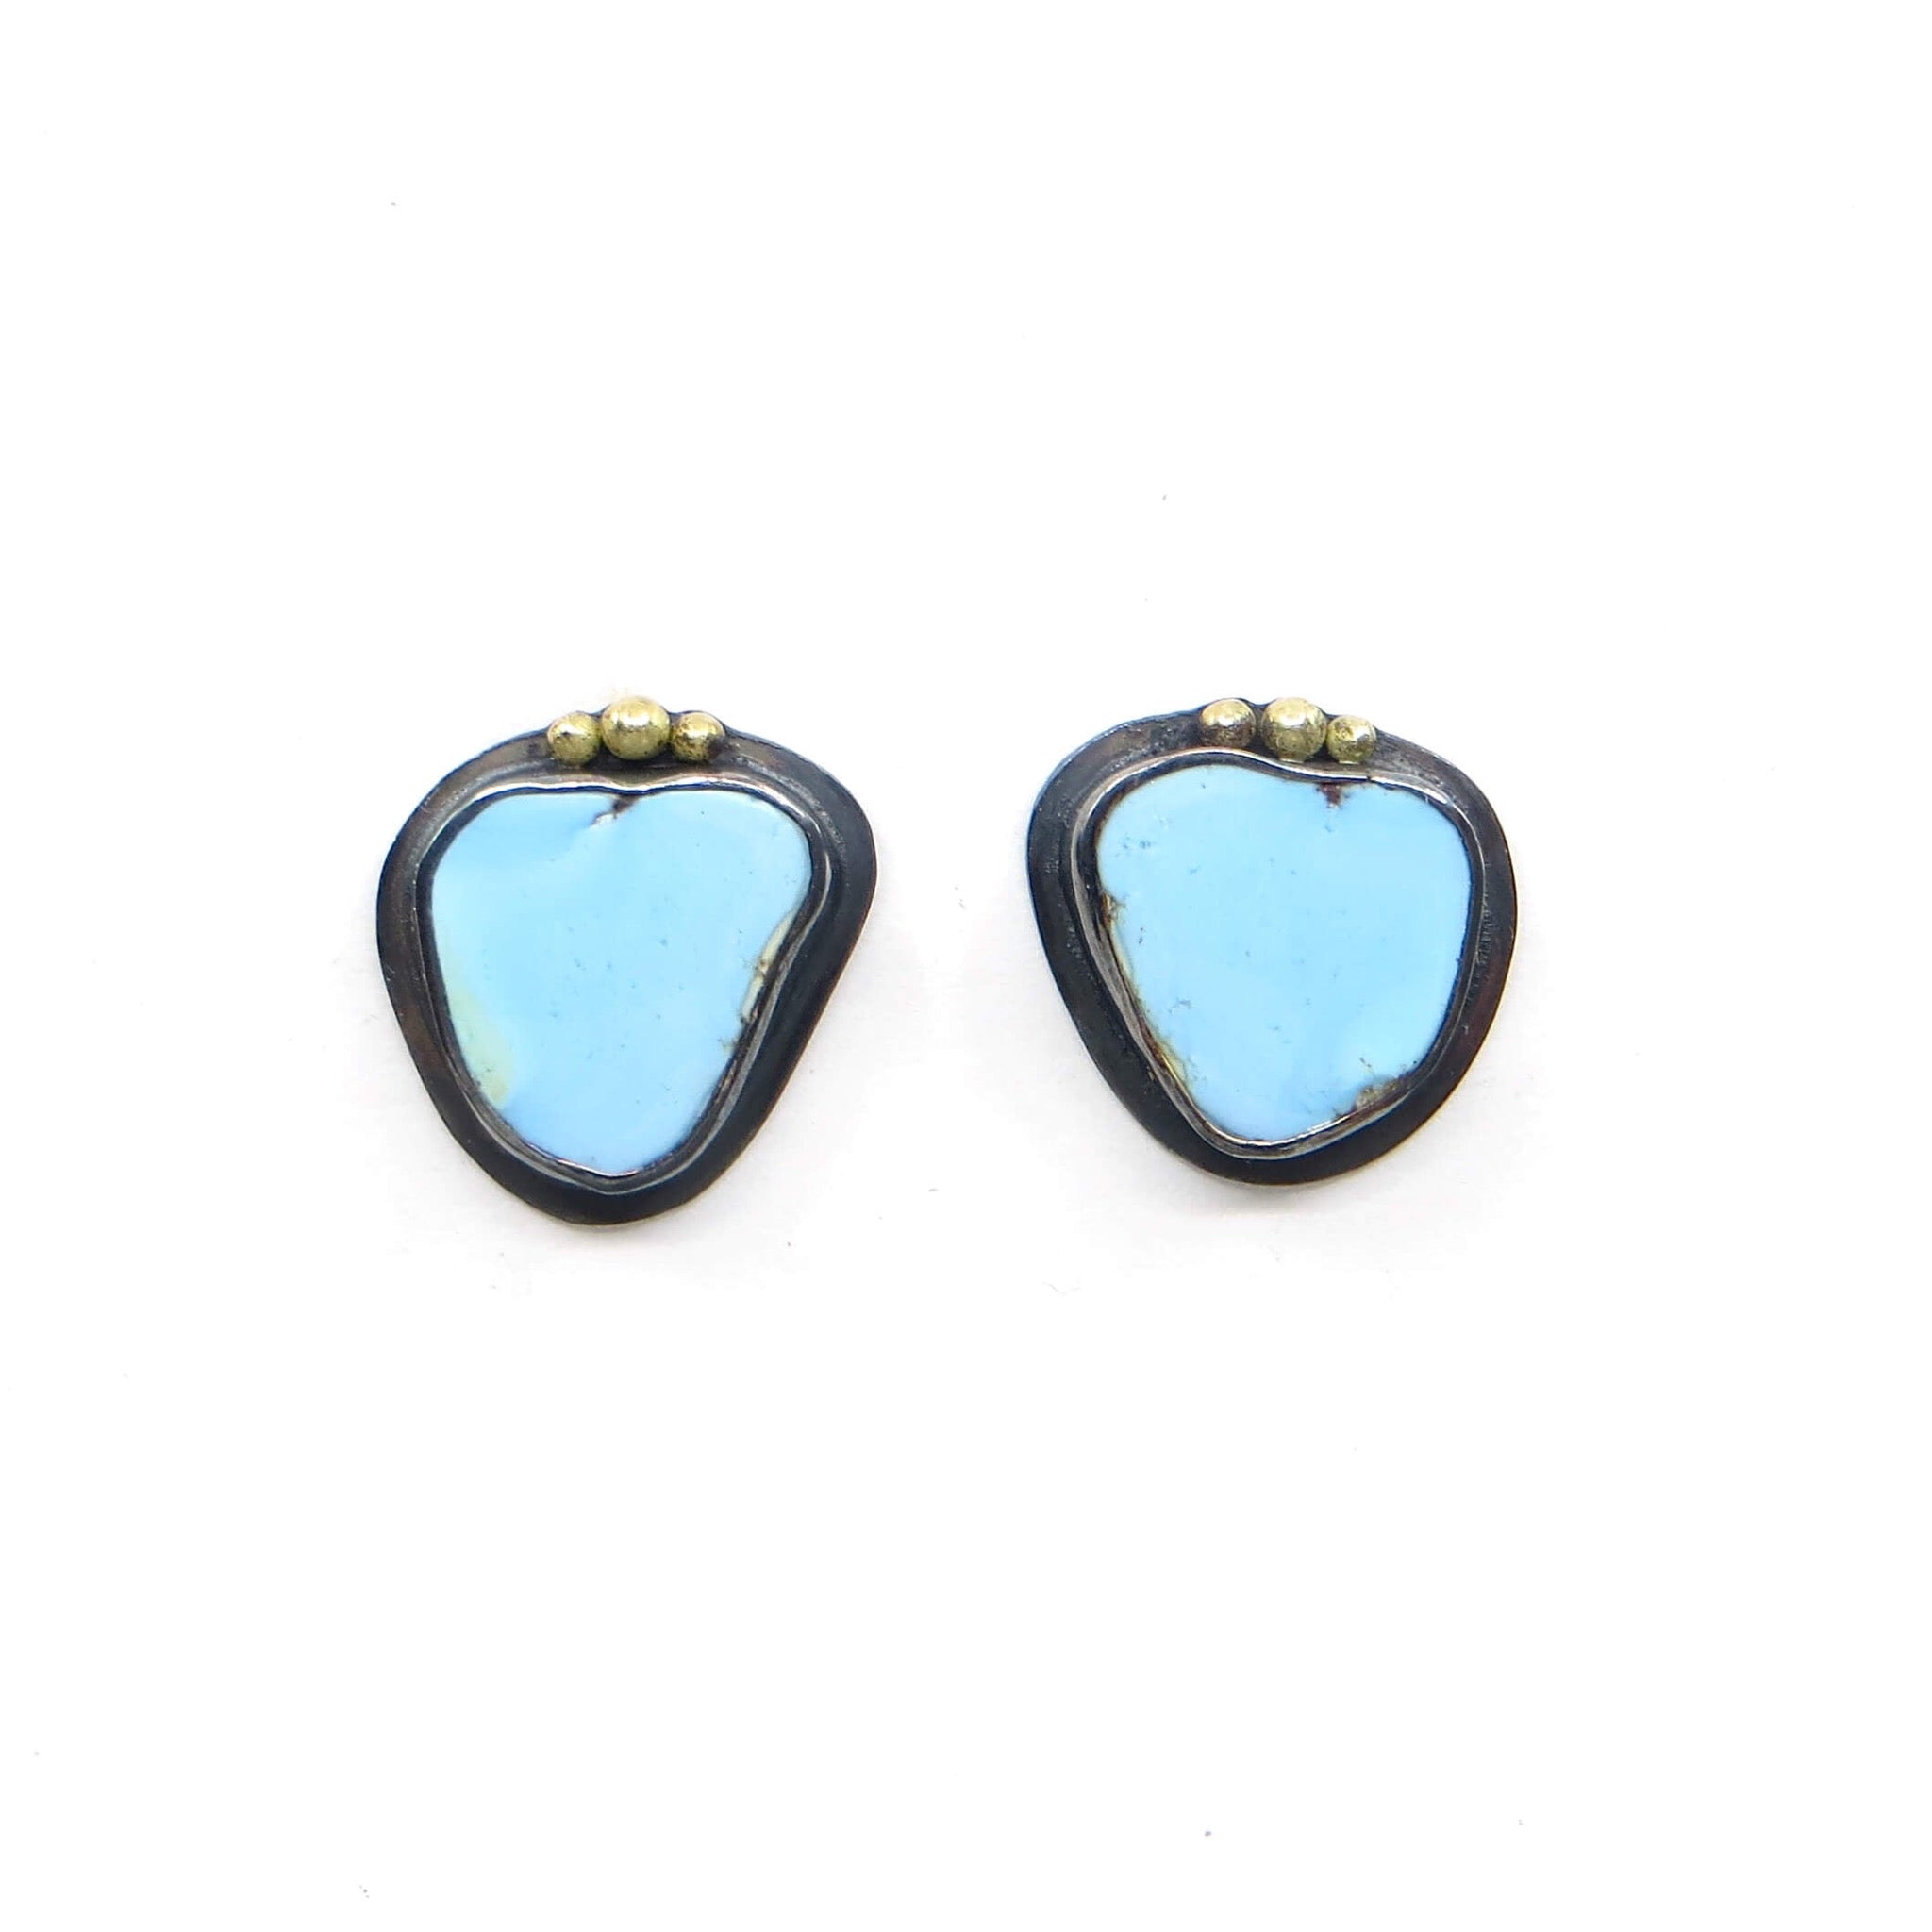 Only 504.00 usd for Golden Hills Turquoise Cameo Figurehead Earrings Online  at the Shop